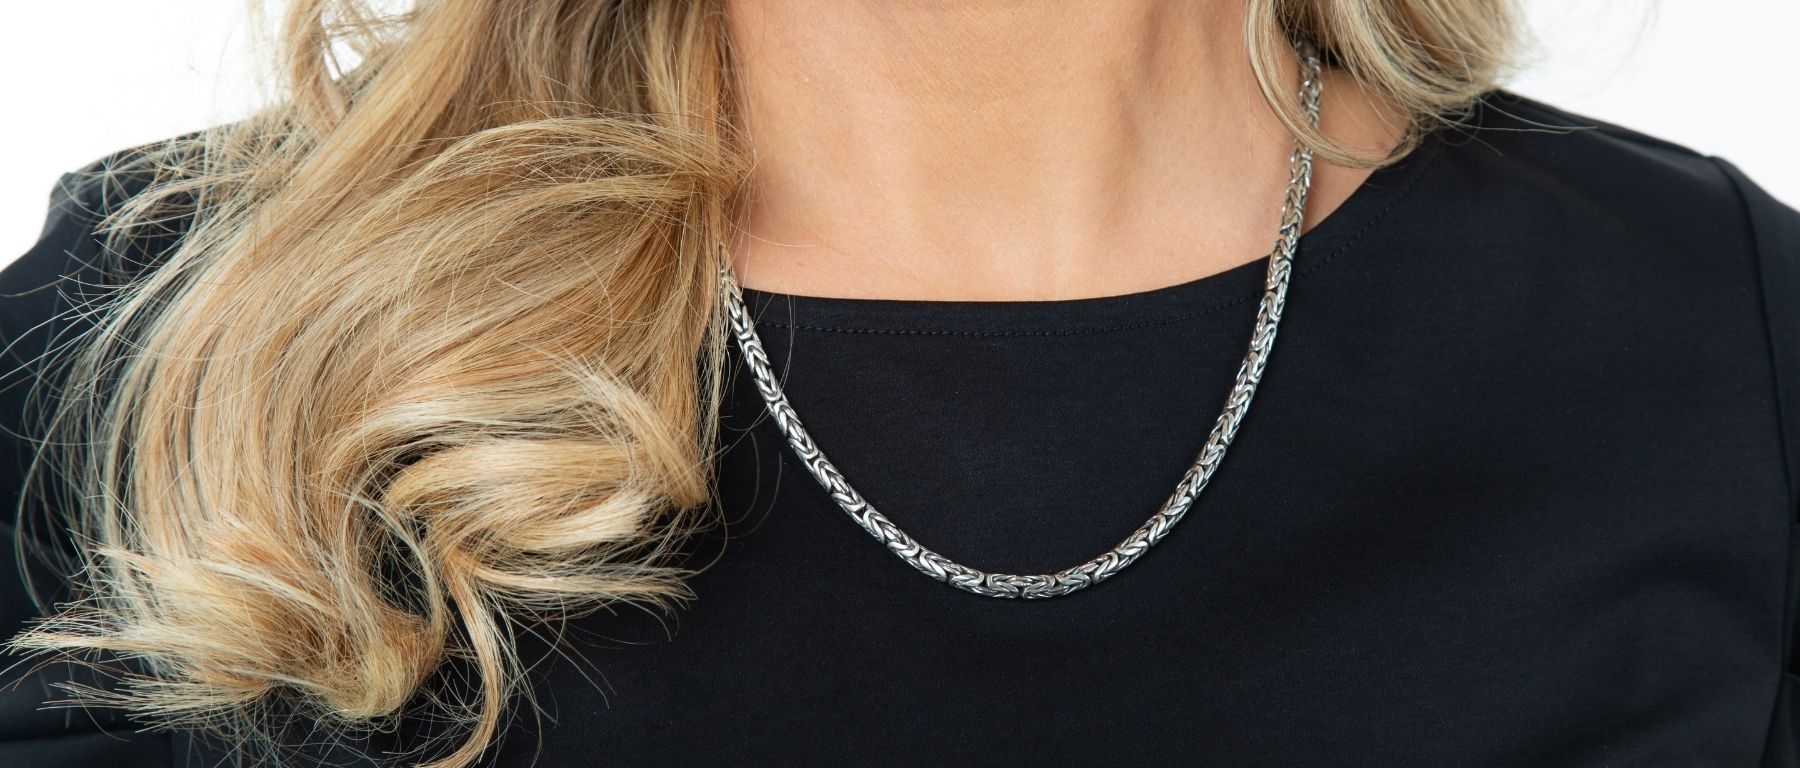 How to Choose the Perfect Necklace for Your Dress